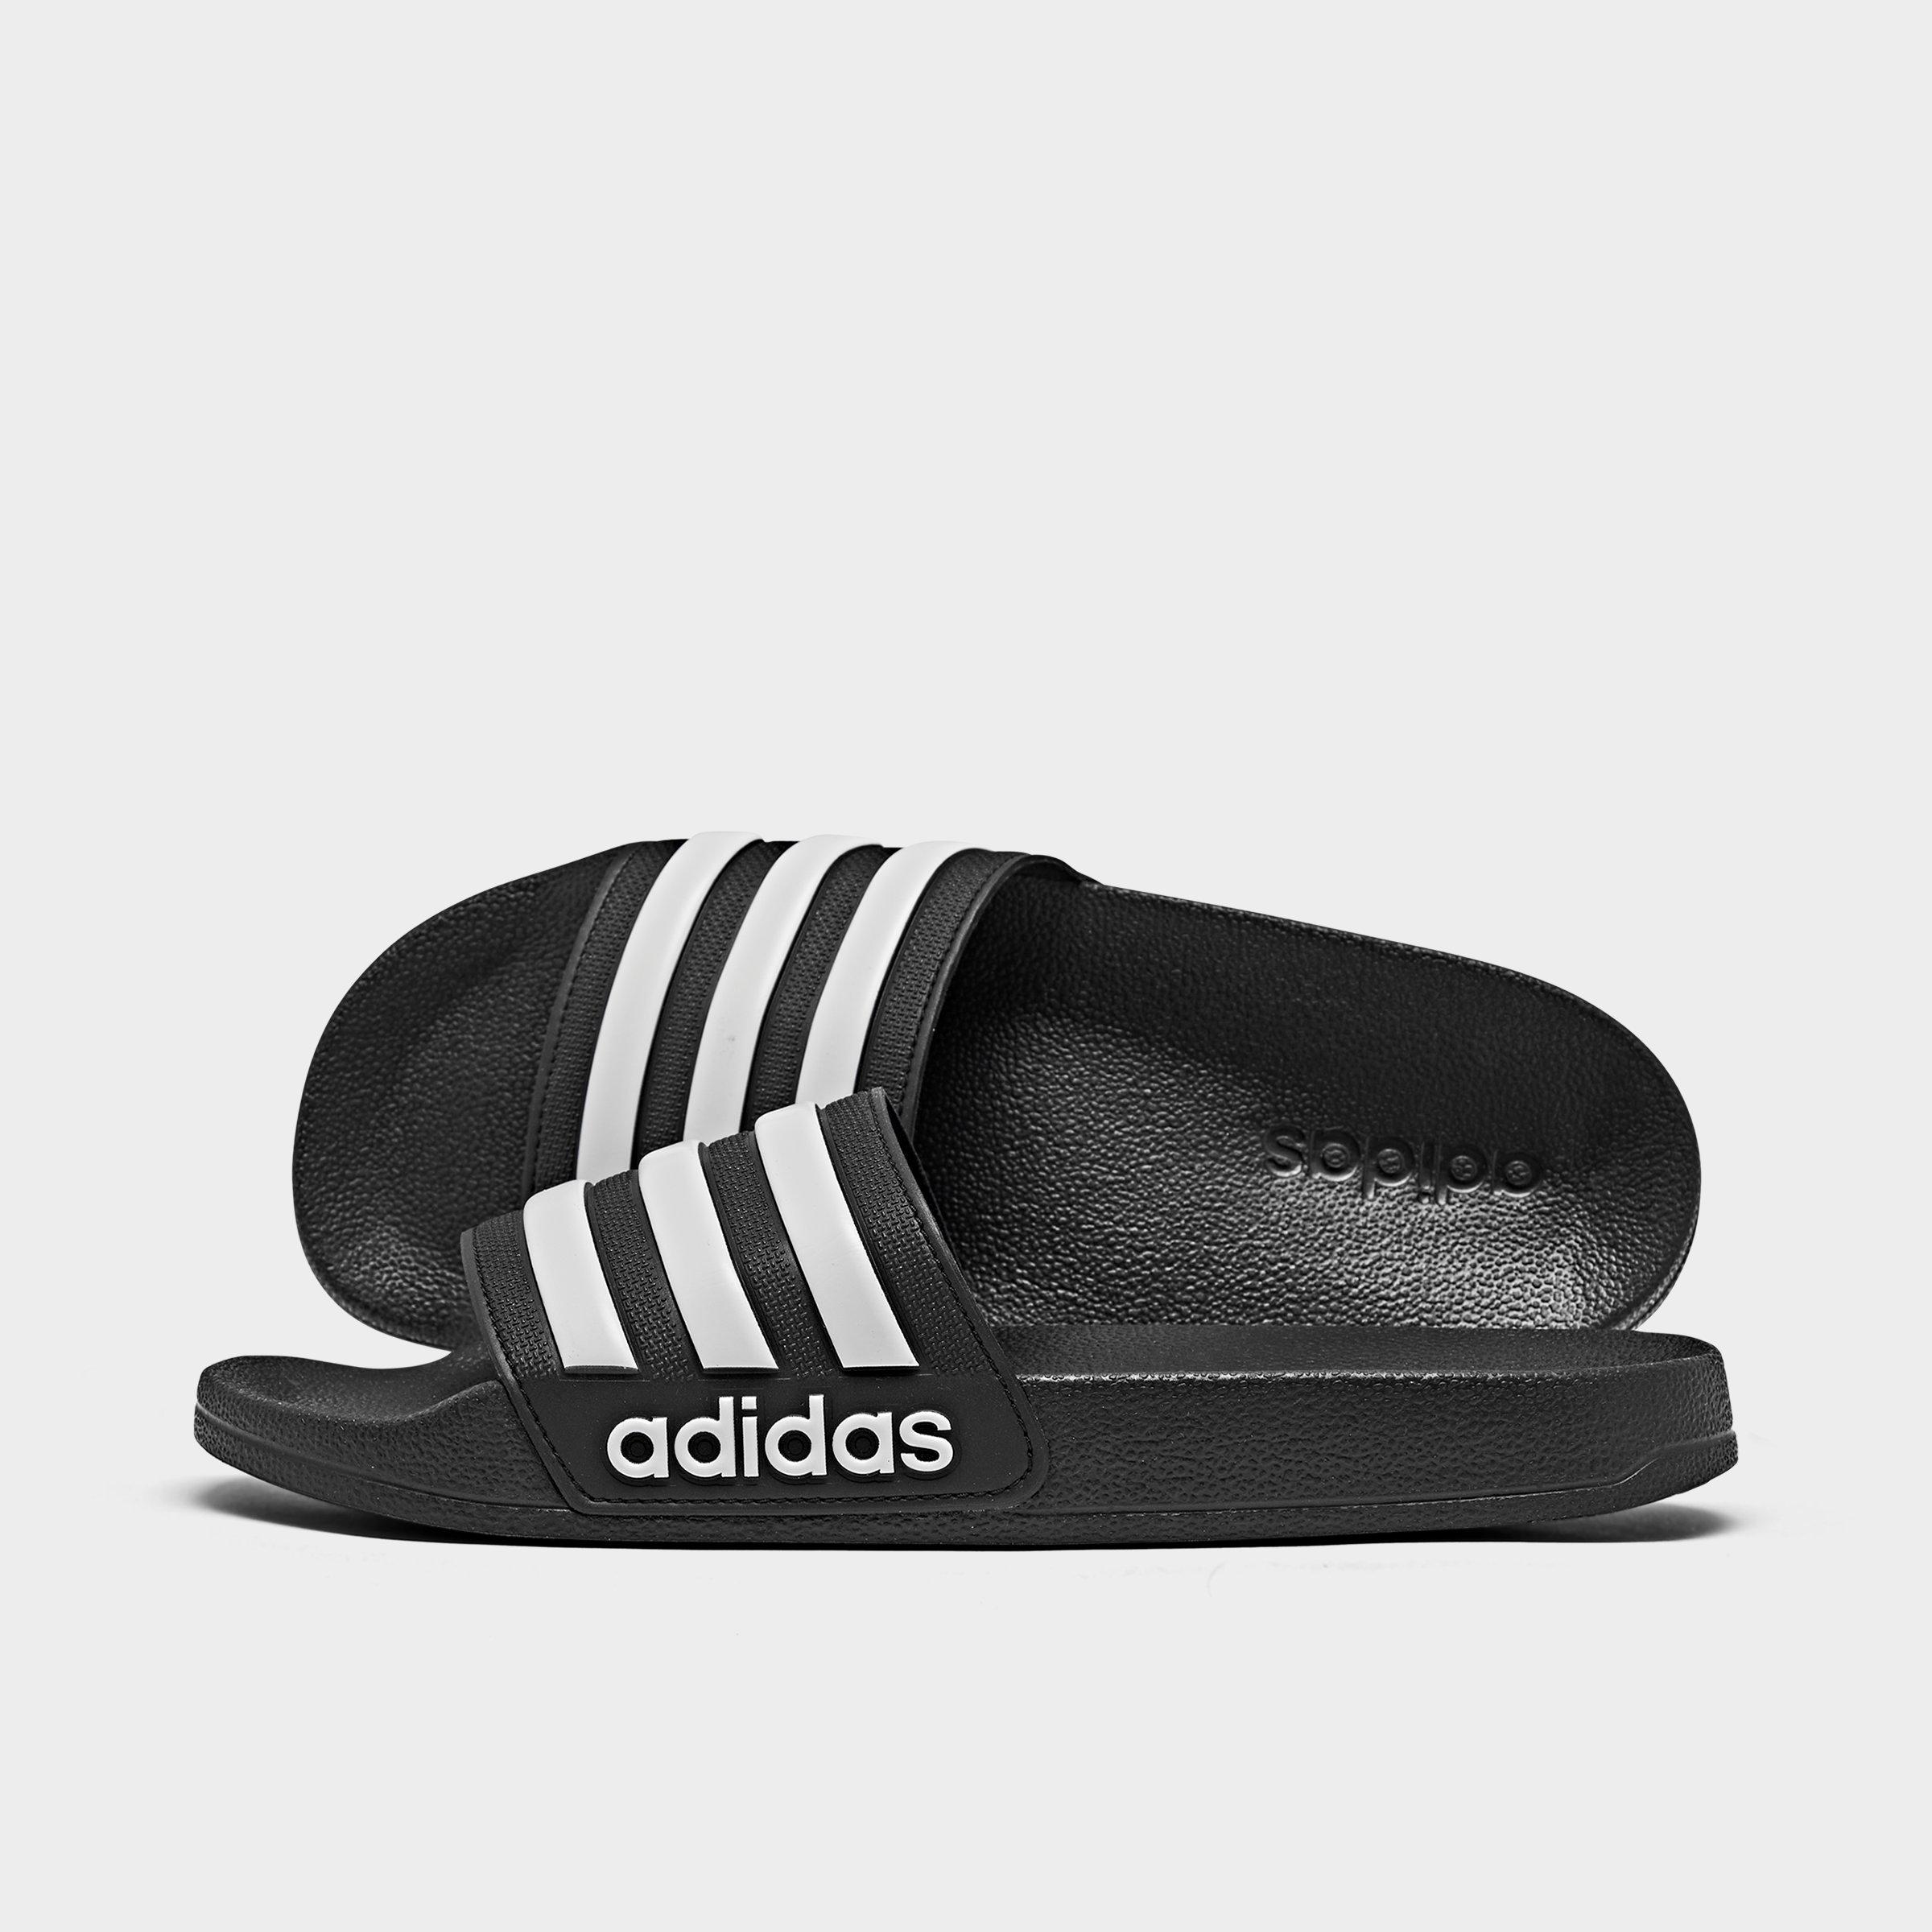 adidas slippers for boys